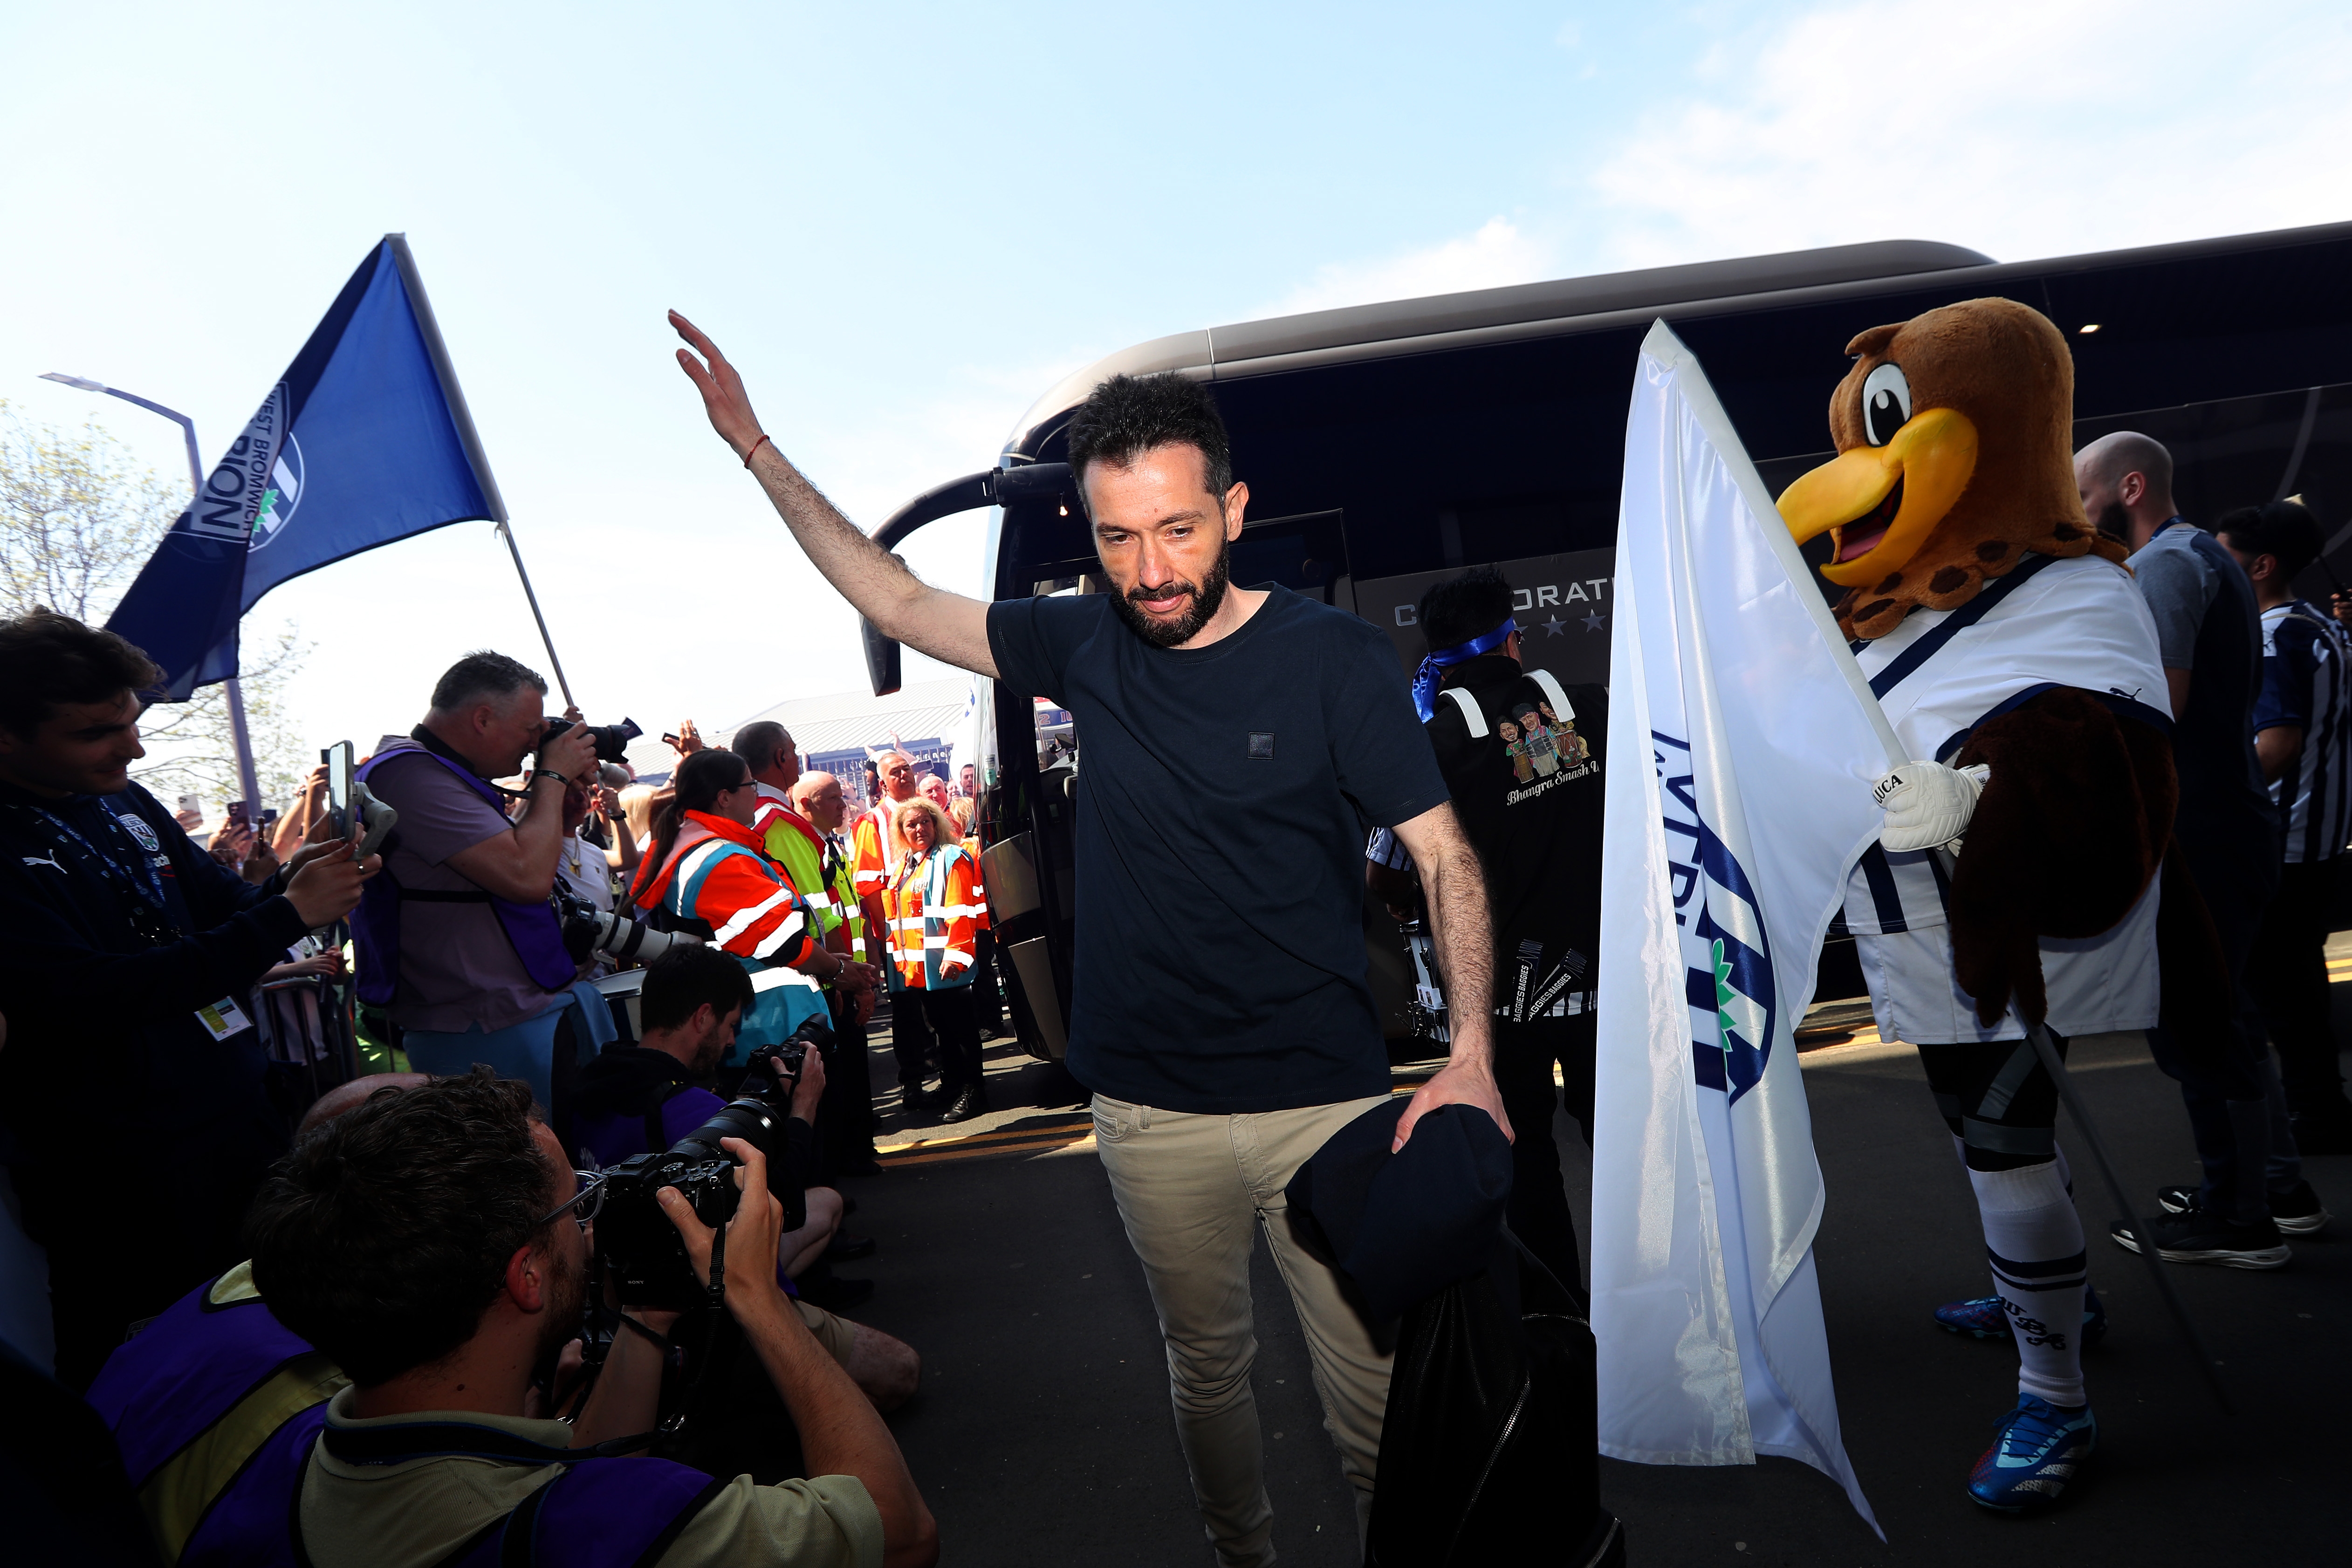 Carlos Corberán waving to supporters as he arrives at The Hawthorns before Albion's game with Southampton